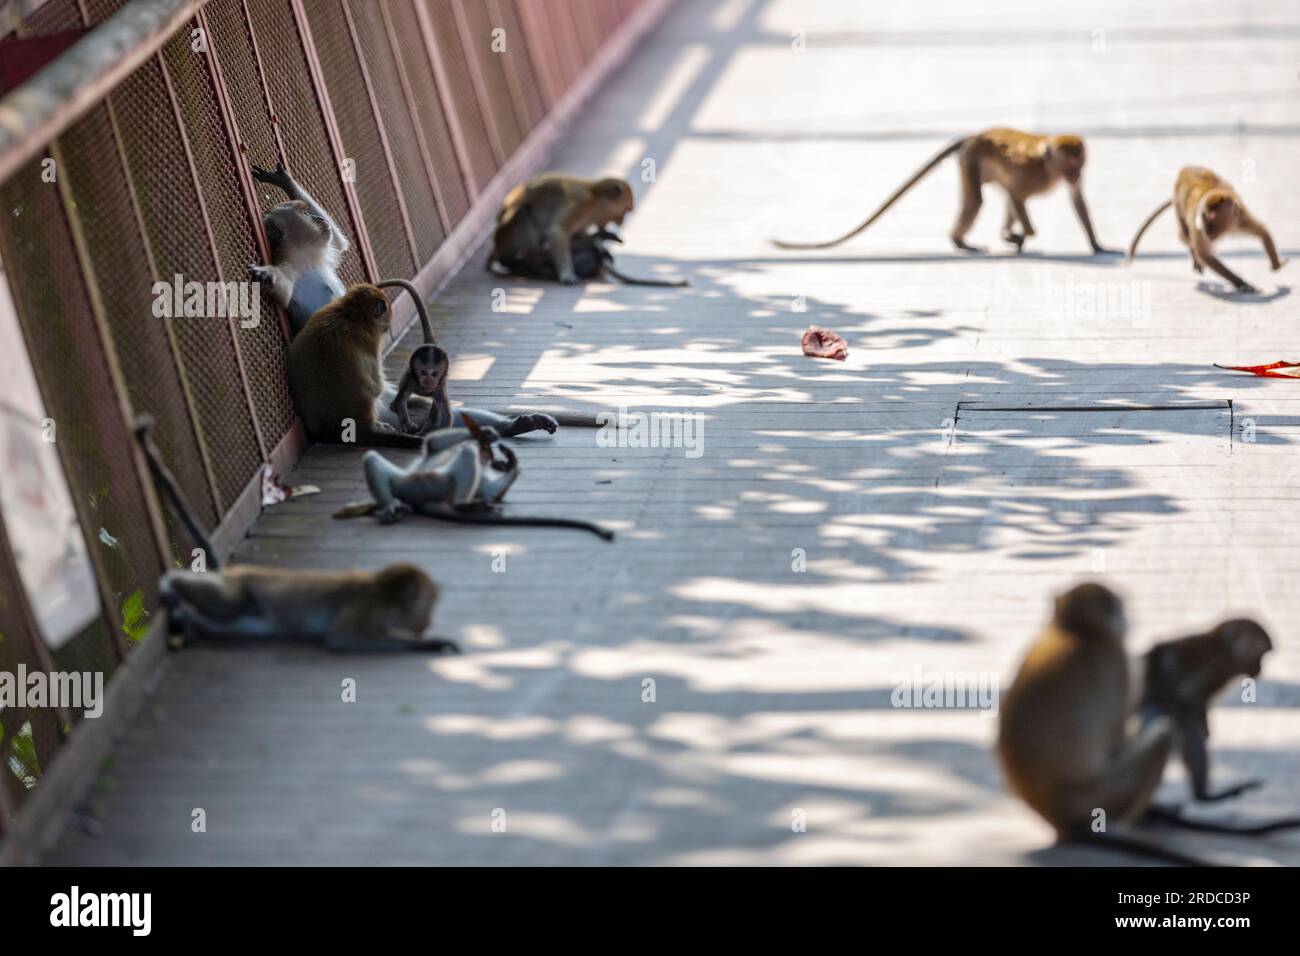 A pair of long-tailed macaque allogrooming on a bridge while other members of the troop play and loaf about, Singapore Stock Photo